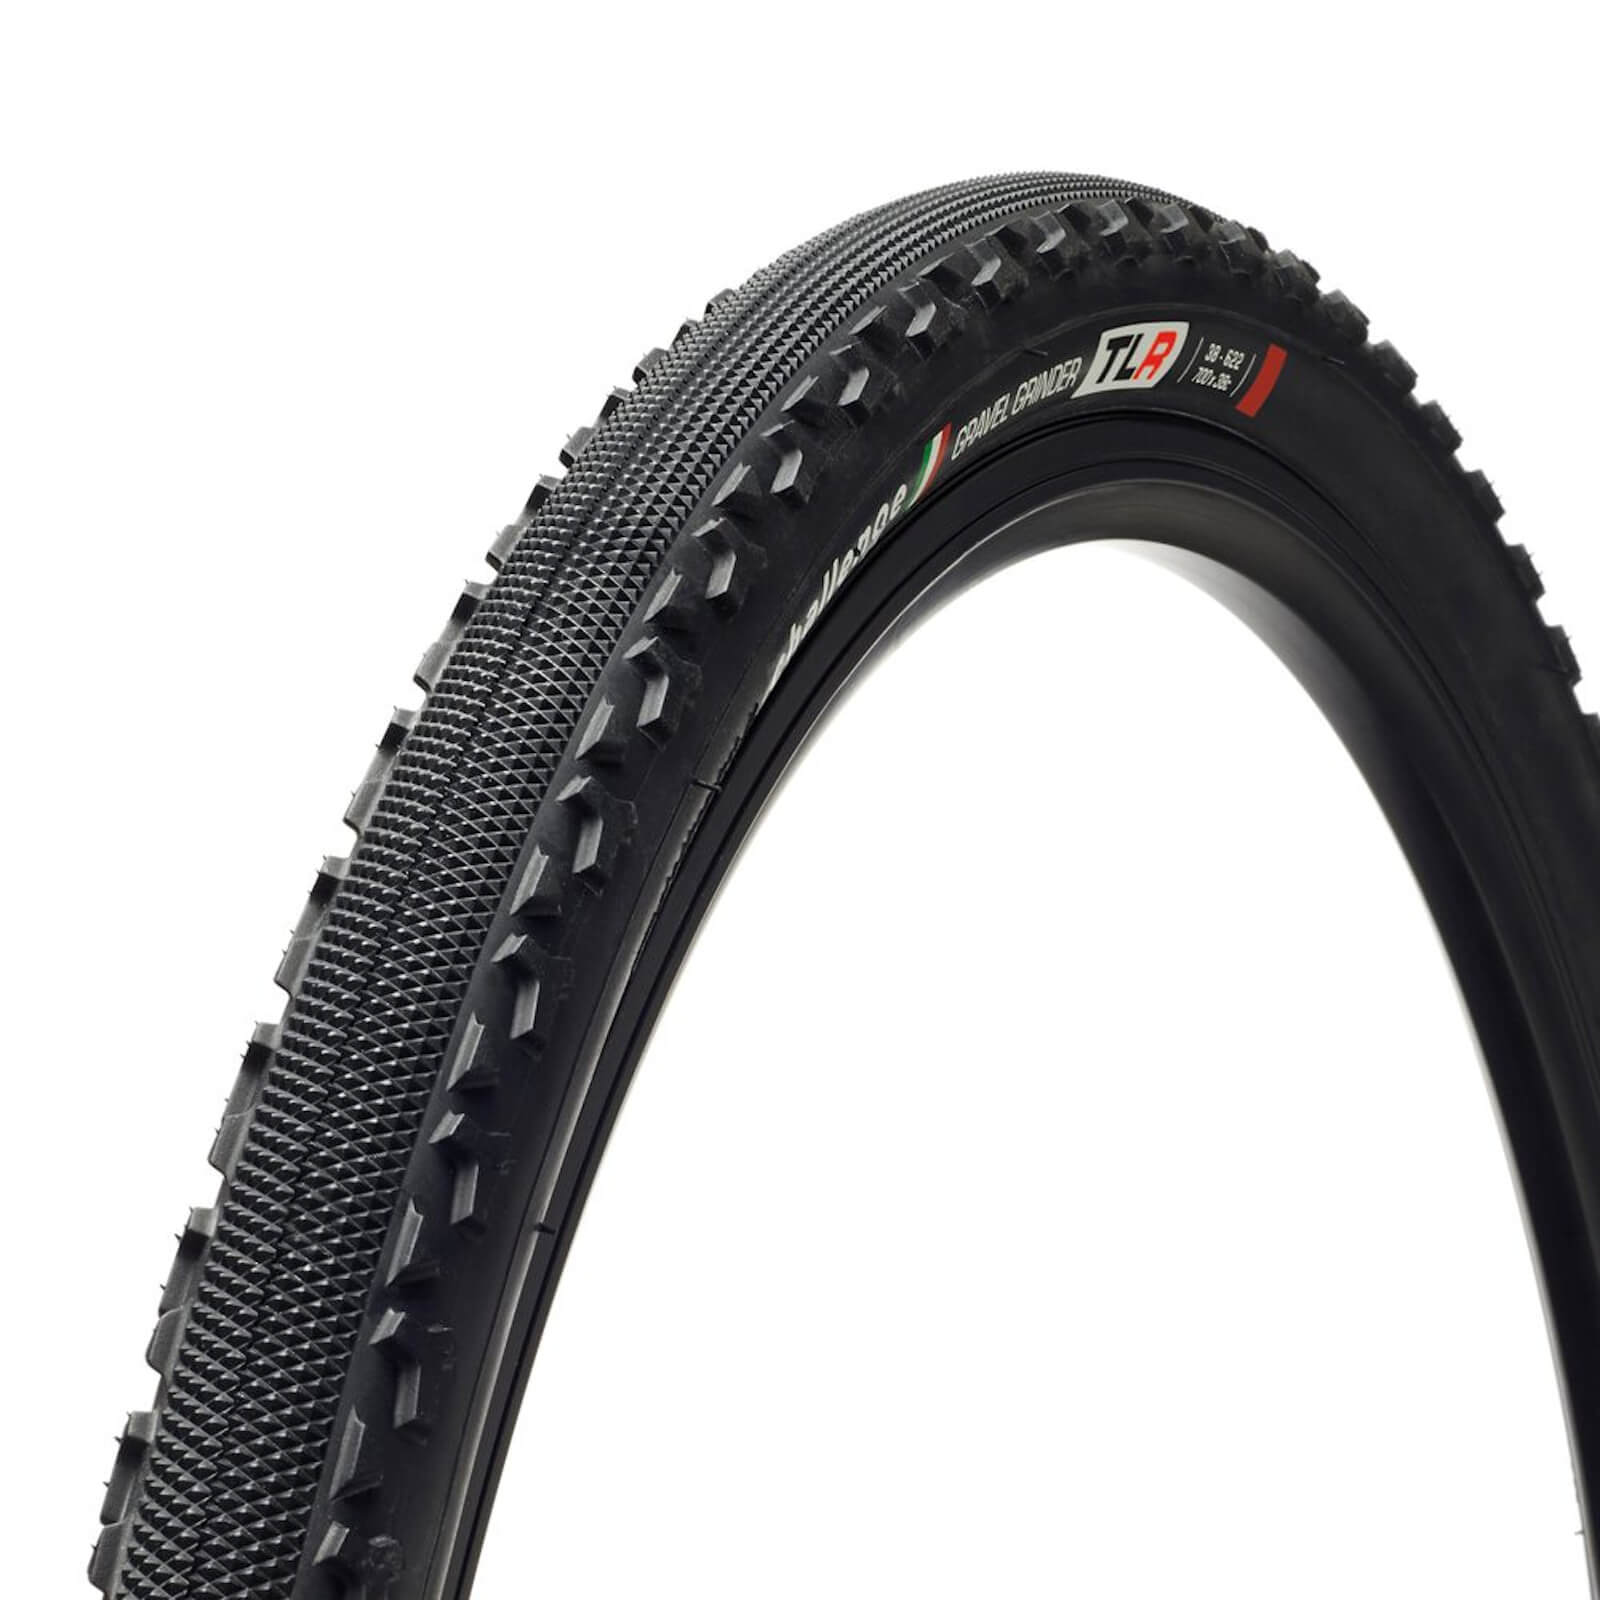 Challenge Gravel Grinder Tubeless Ready Clincher Tyre - 700 x 42c